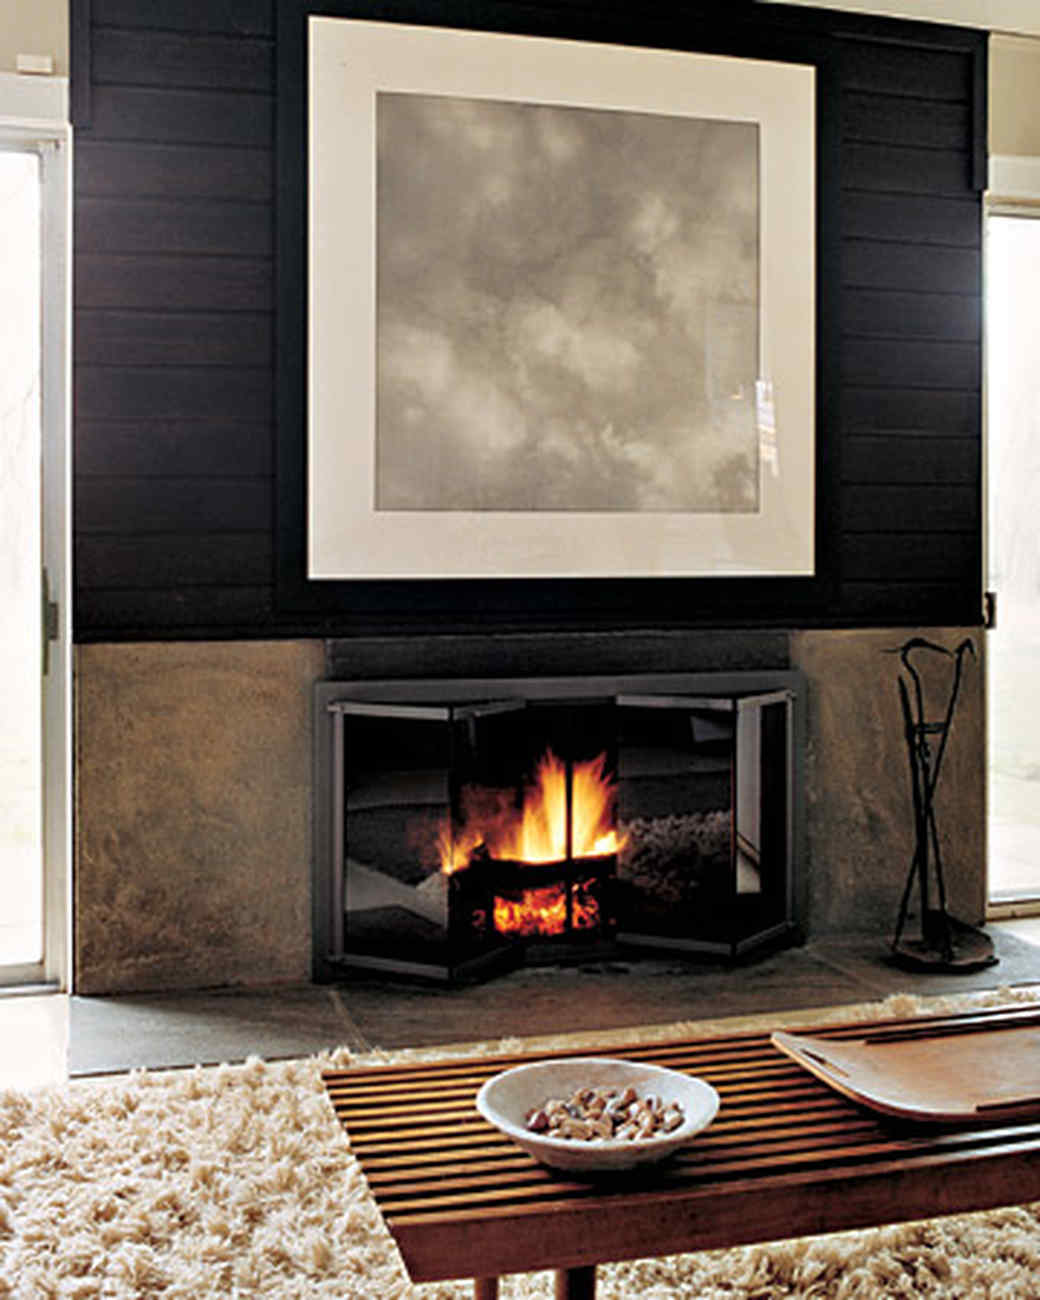 Get cozy! Fall is officially here and with the chilly weather comes the comfort of snuggling in front of a soothing fireplace. We round up design ideas.